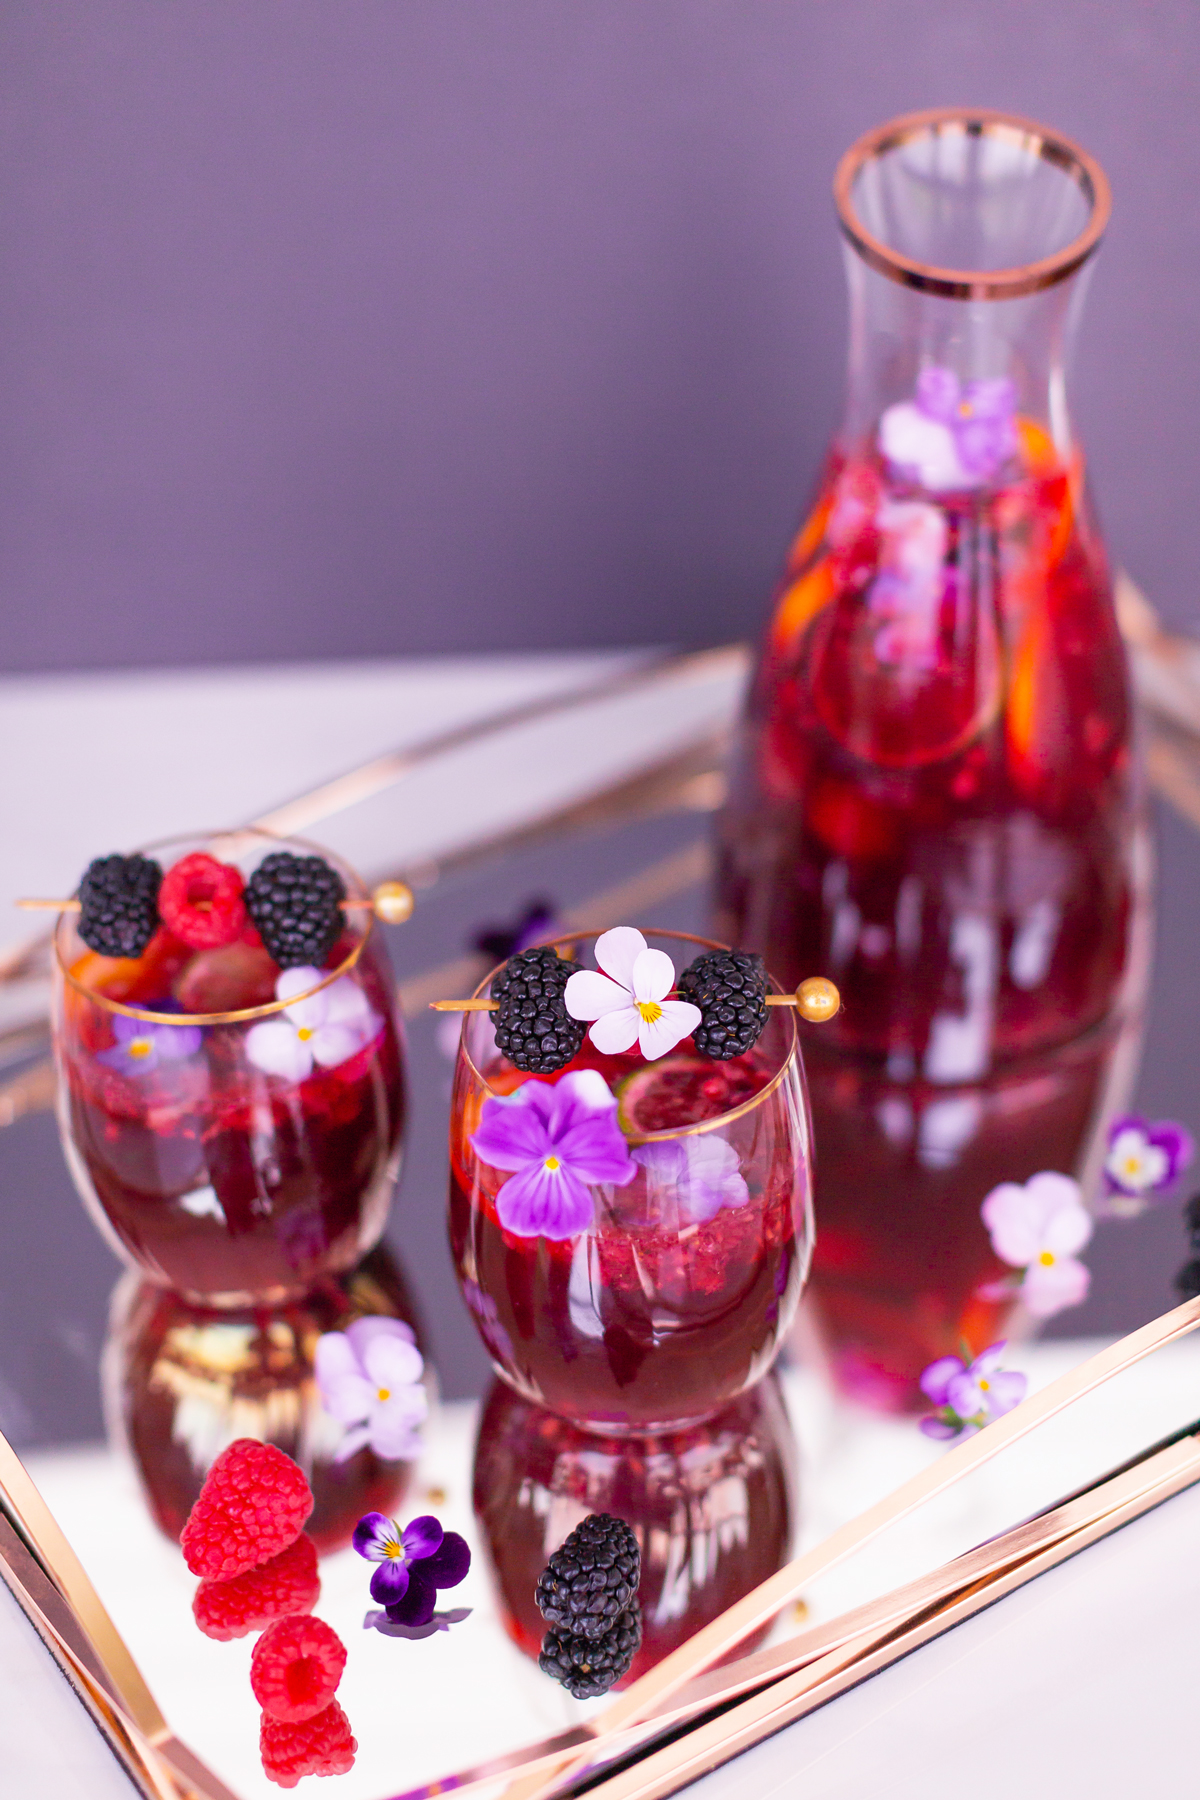 5 Cozy Fall Cocktail and Sangria Recipes | JustineCelina’s Best Fall Cocktail and Sangria Recipes | Violette Noir Berry Sangria | The Best Berry Sangria Recipe | Pinot Noir Sangria | Chambord Sangria Recipe | Red Sangria with Crème de Violette | The Best Berry Sangria for the holidays | Holiday Red Wine Sangria | Winter Berry Sangria Recipe | Healthy No Added Sugar Sangria // JustineCelina.com // Cocktail Photographer and Stylist | Calgary Blogger // JustineCelina.com